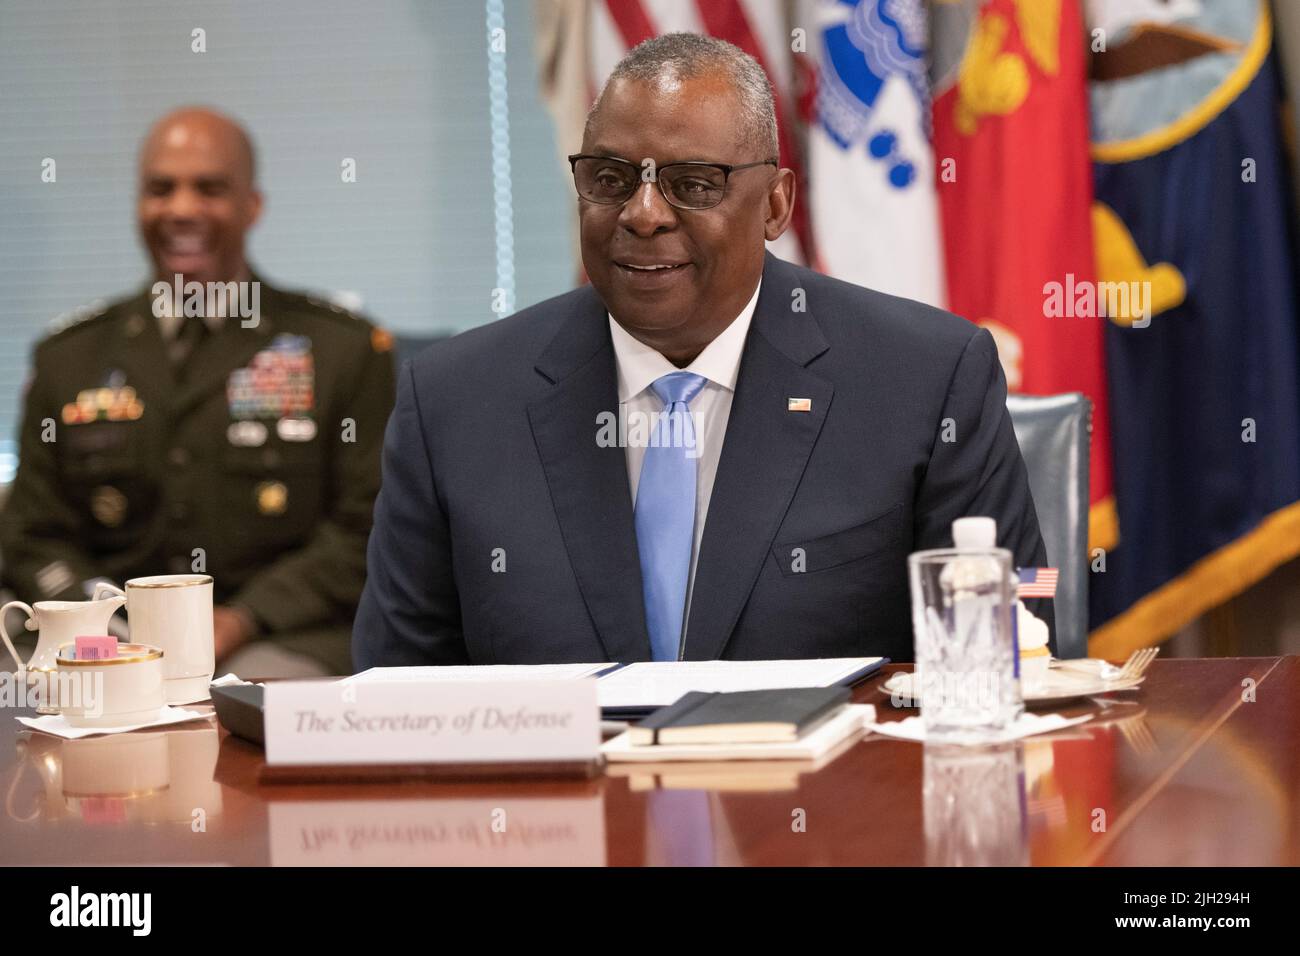 Arlington, United States Of America. 13th July, 2022. Arlington, United States of America. 13 July, 2022. U.S. Secretary of Defense Lloyd J. Austin III hosts Australian Deputy Prime Minister and Defense Minister Richard Marles during a face-to-face bilateral meeting at the Pentagon, July 13, 2022 in Arlington, Virginia. Credit: Lisa Ferdinando/DOD/Alamy Live News Stock Photo